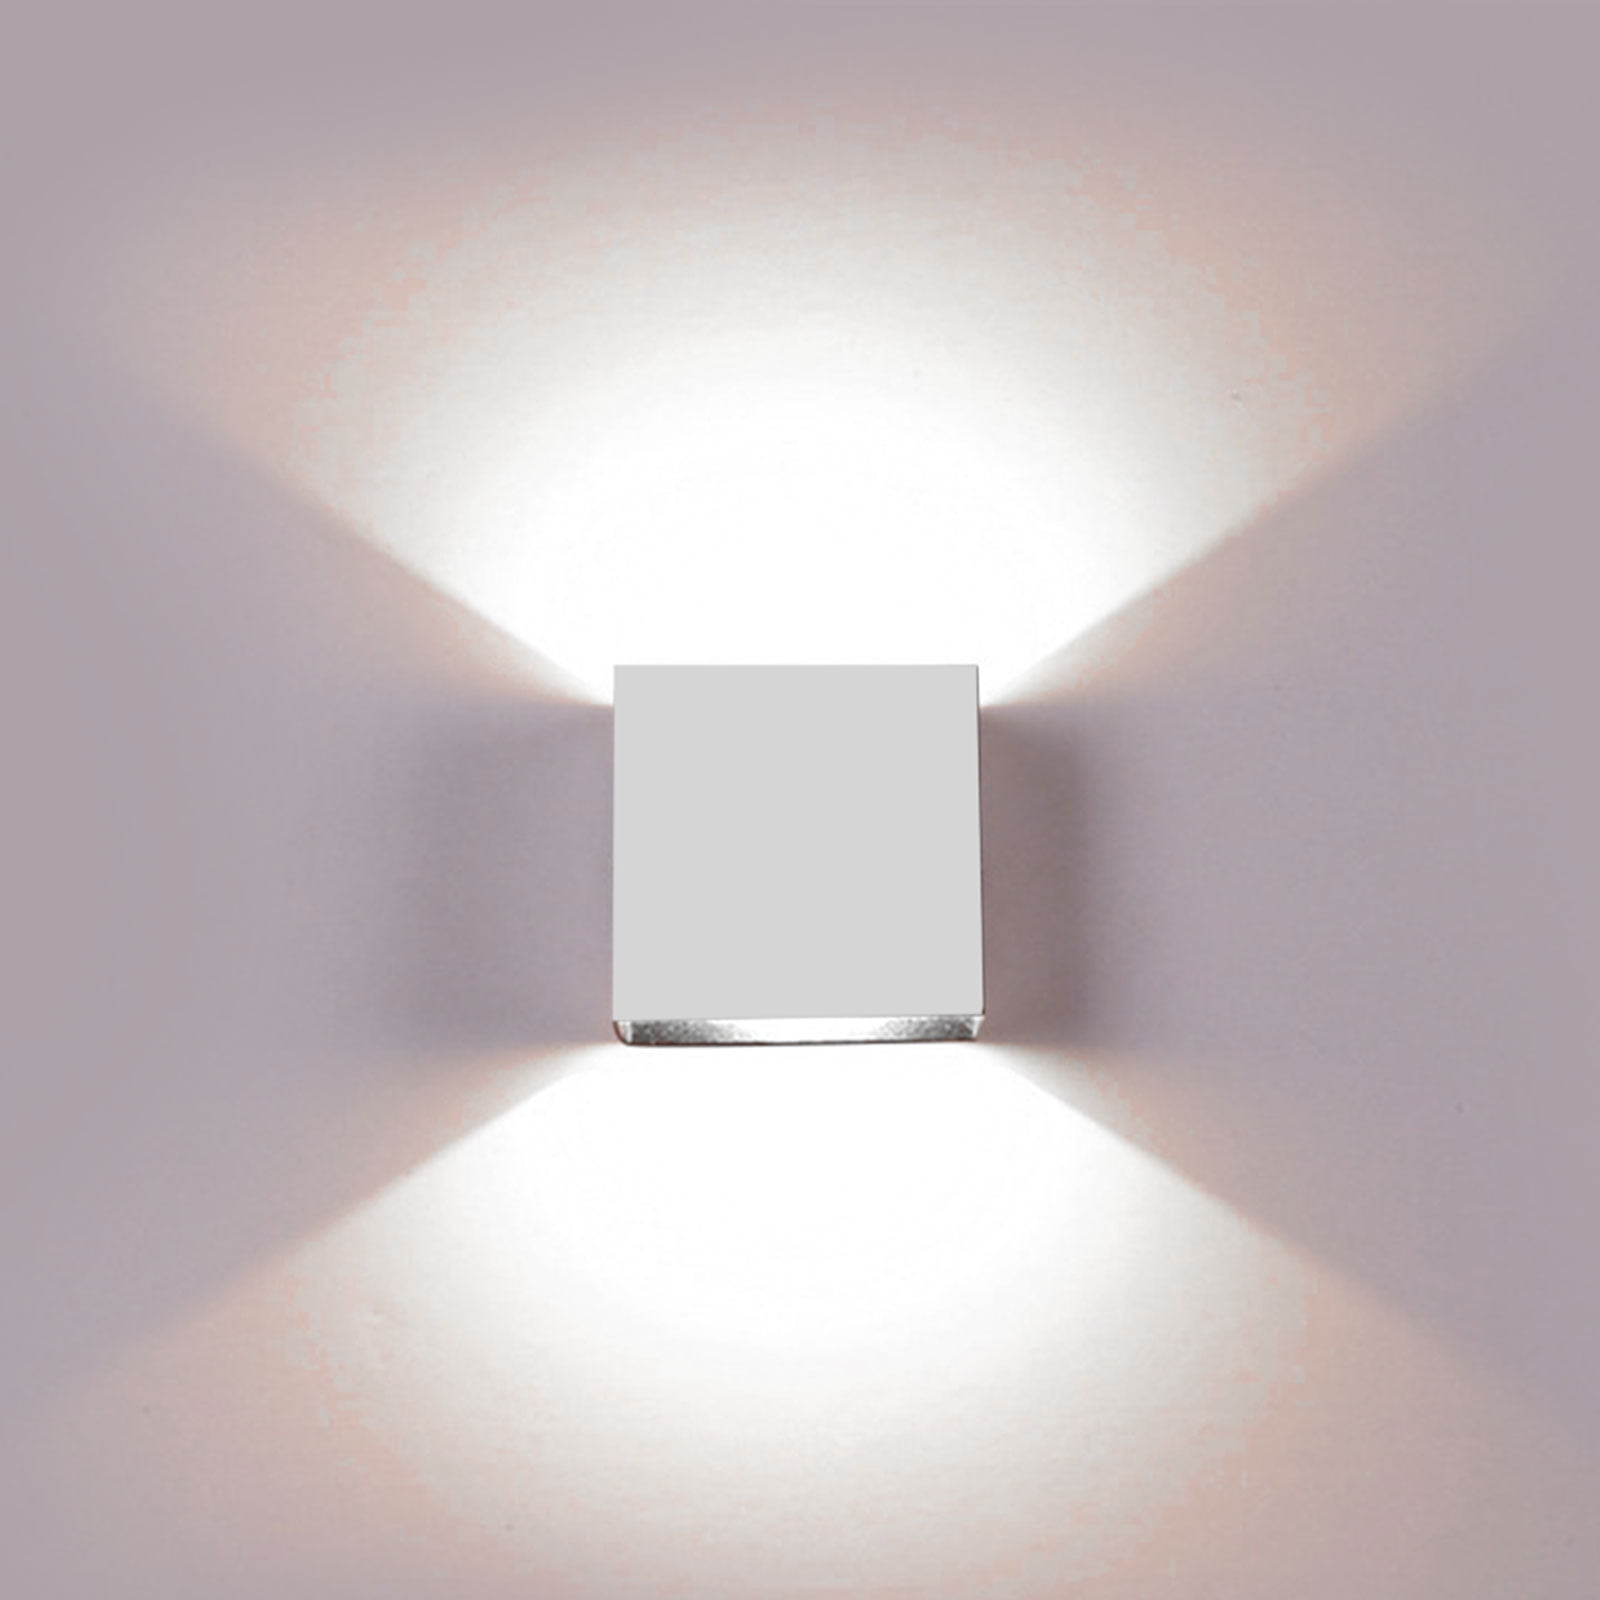 Modern 3W LED Wall Light Up Down Lamp Sconce Spot Lighting Home Bedroom Fixture 